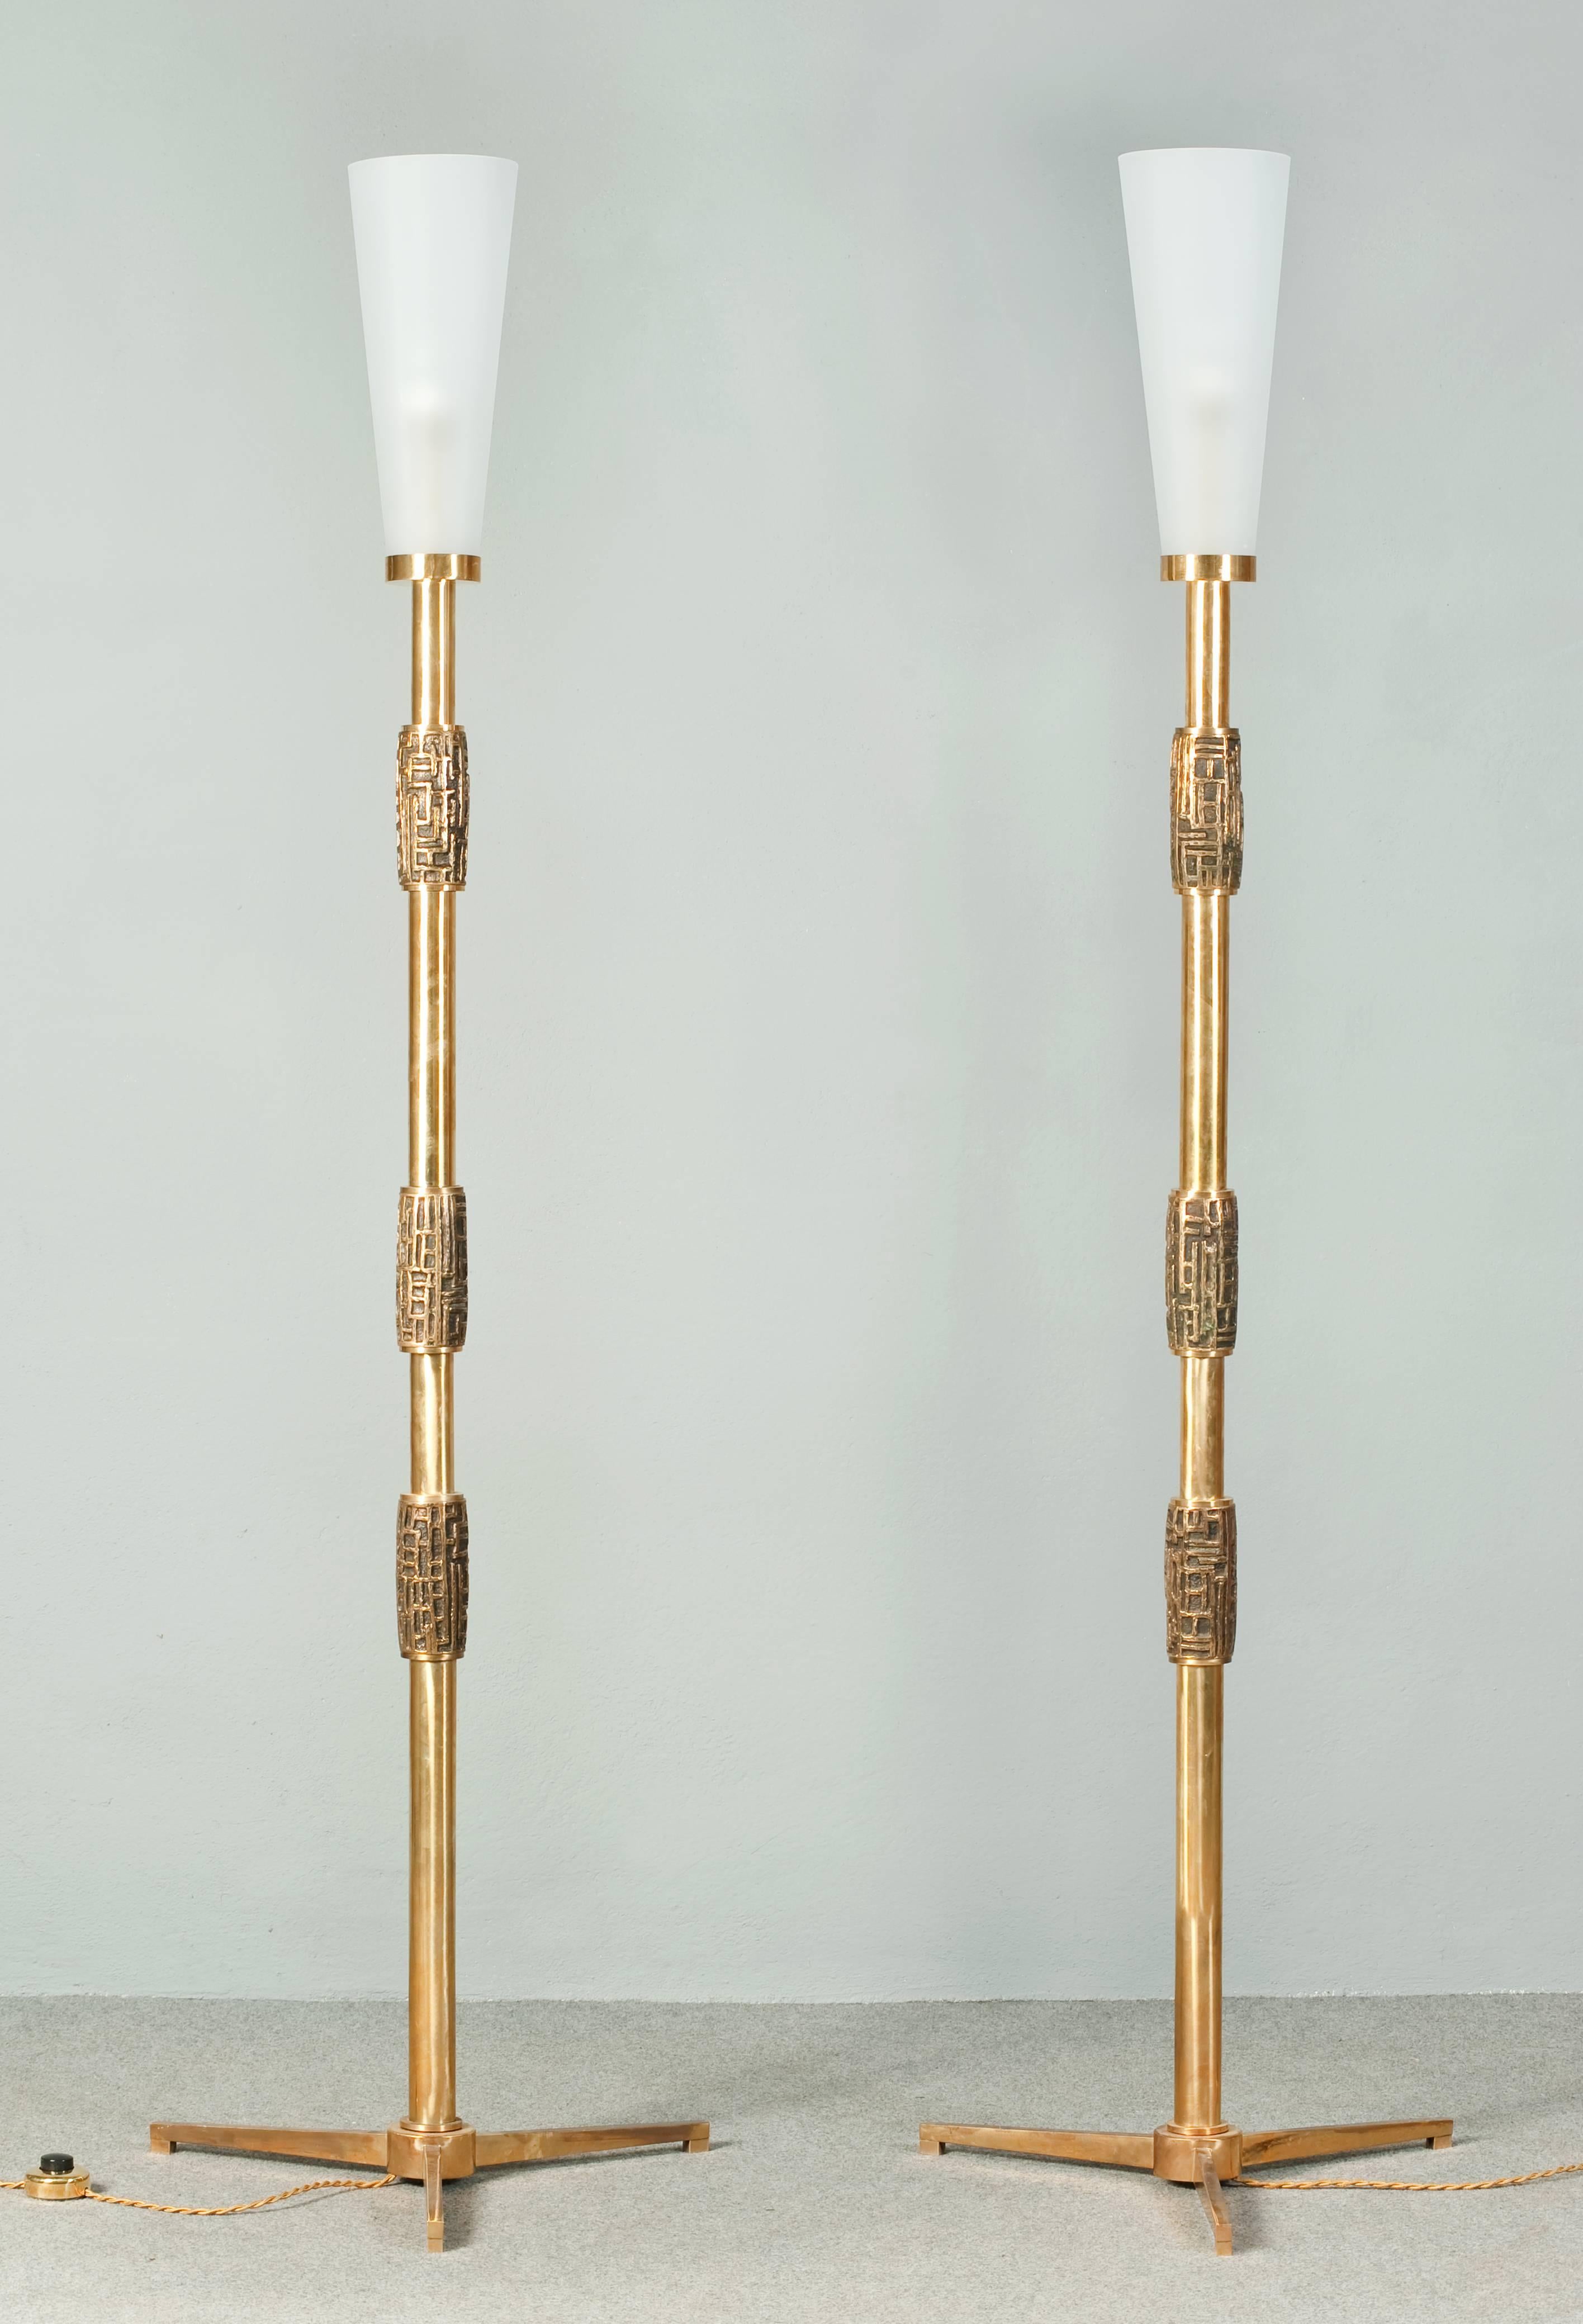 Very rare pair of Luciano Frigerio bronze floor lamps.
White opaline glass shade.